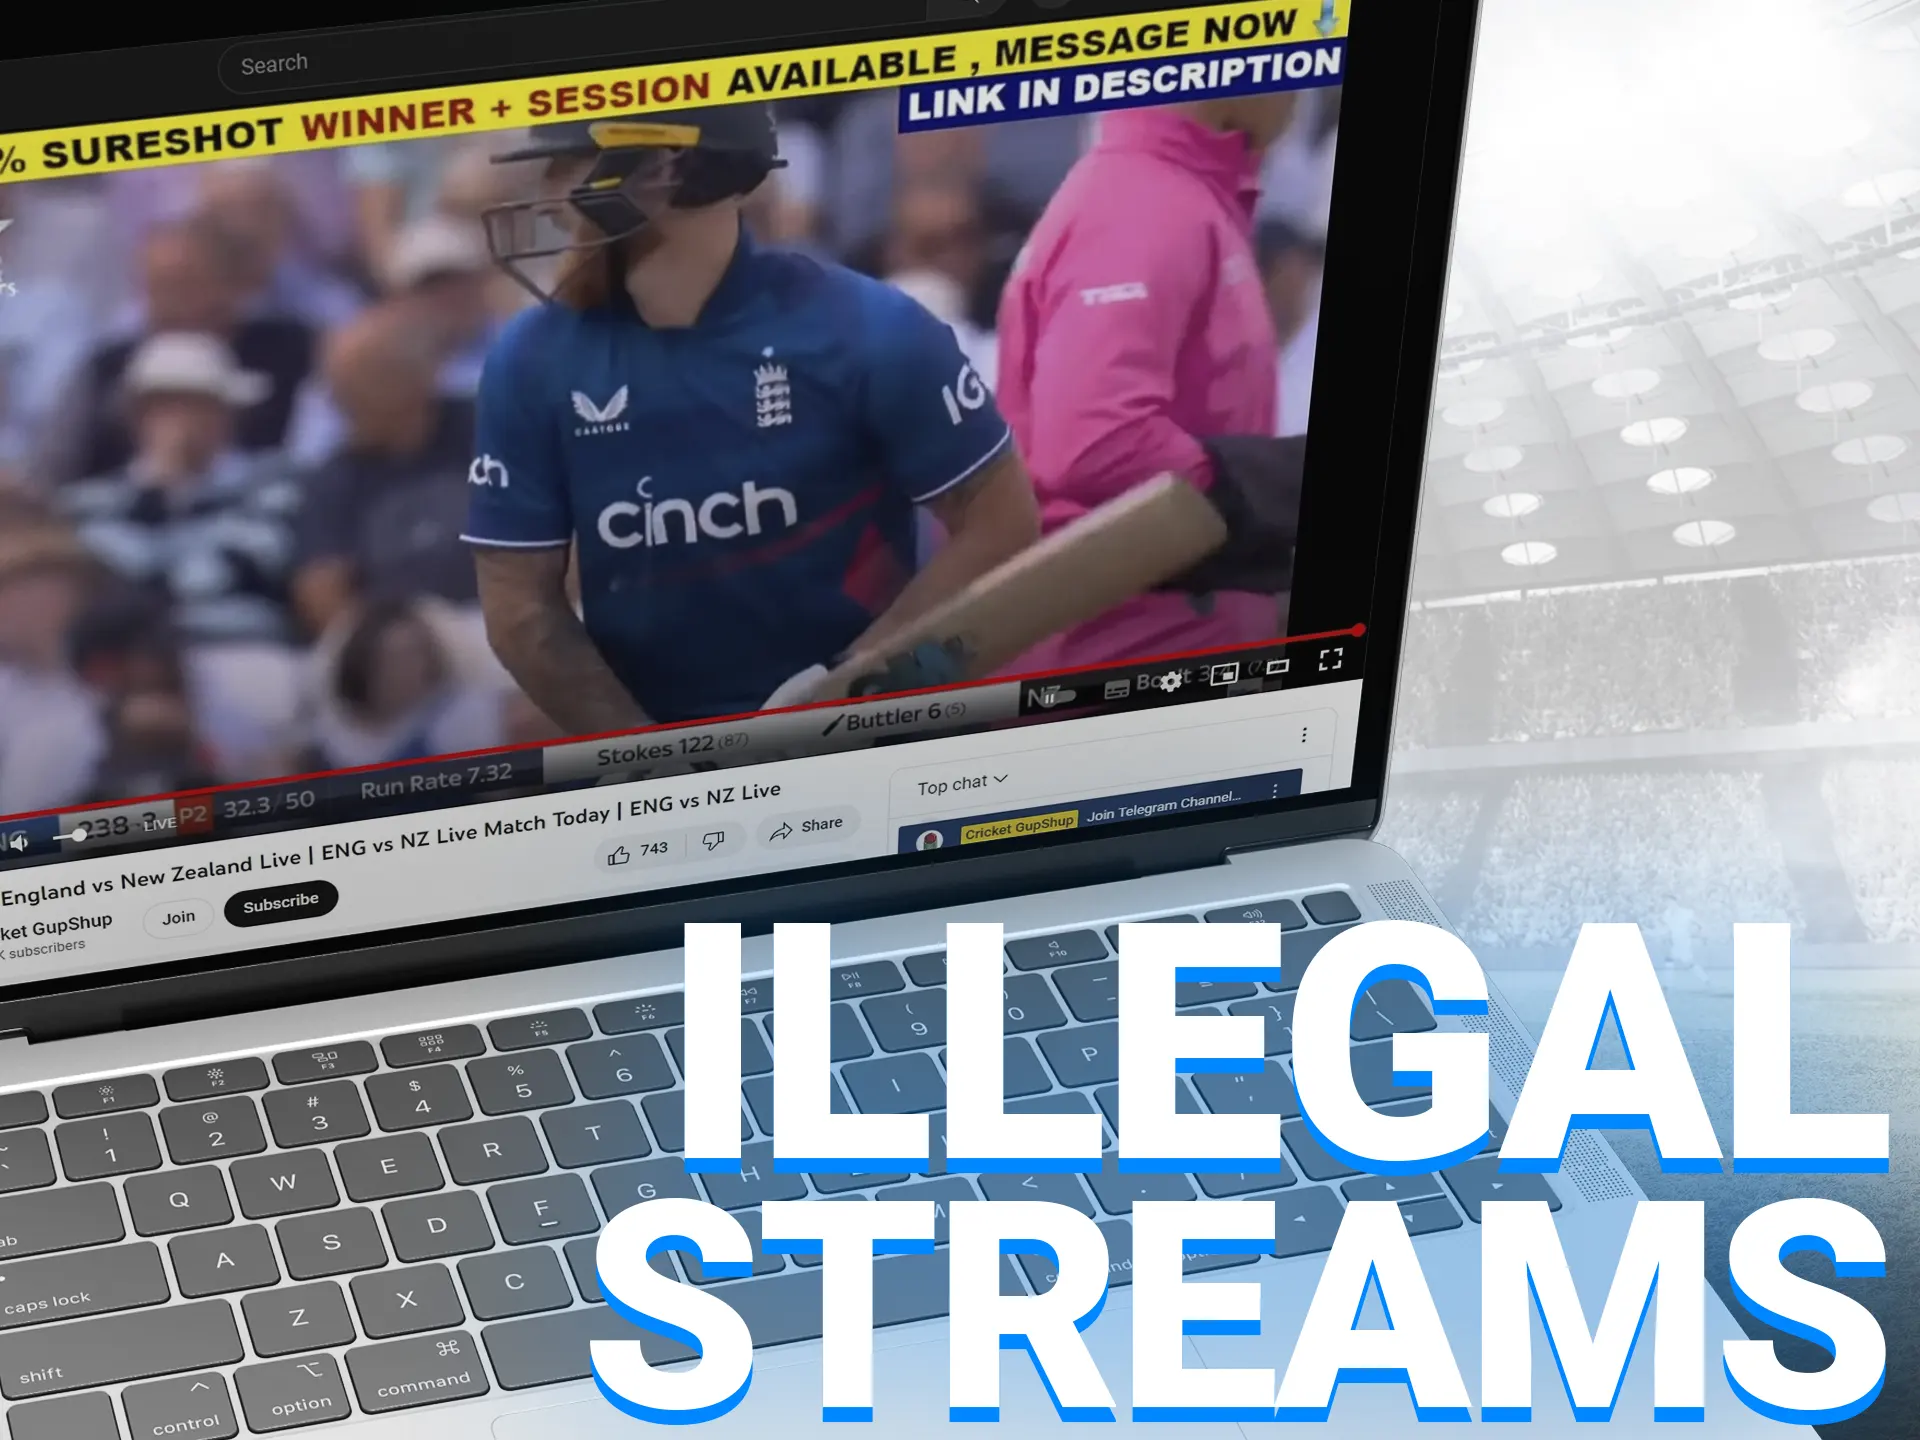 We recommend watching tournament broadcasts on sites that have distribution rights.